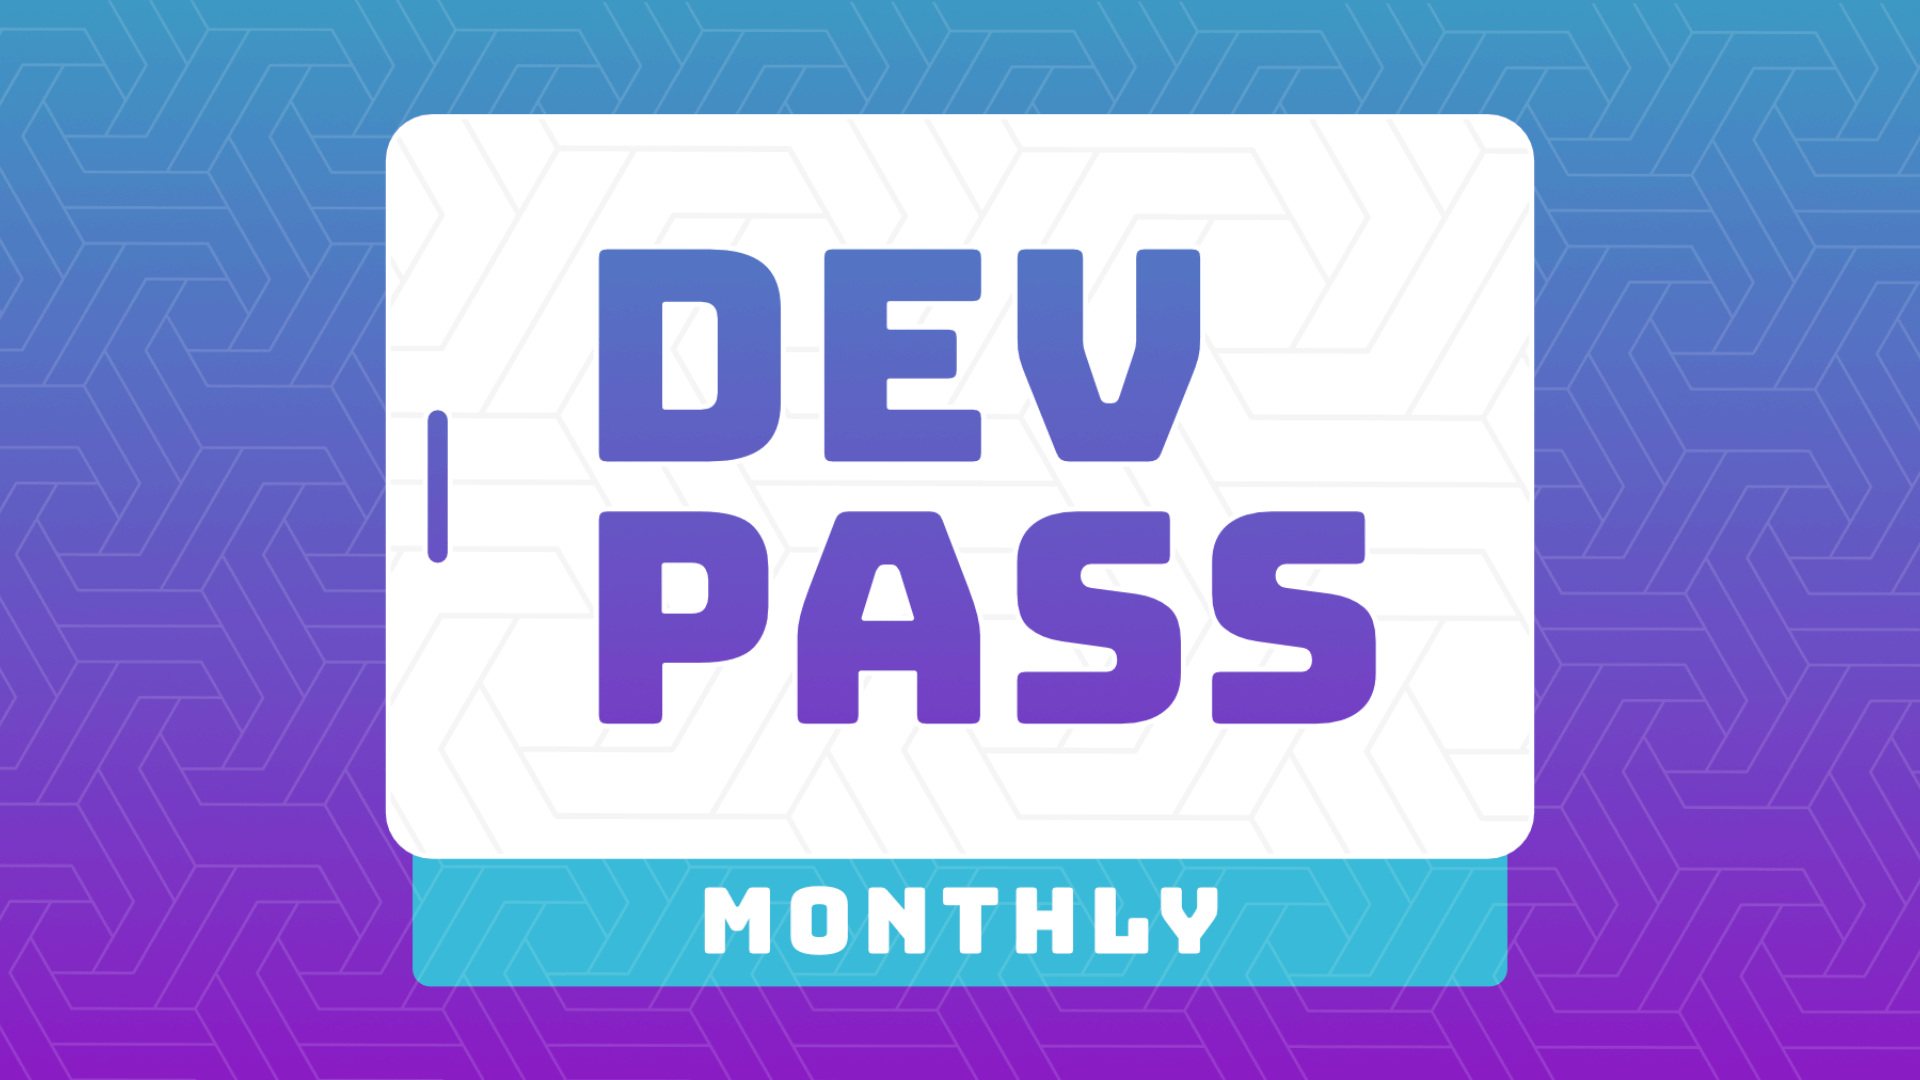 DevPass Monthly Subscription Overview Card Image